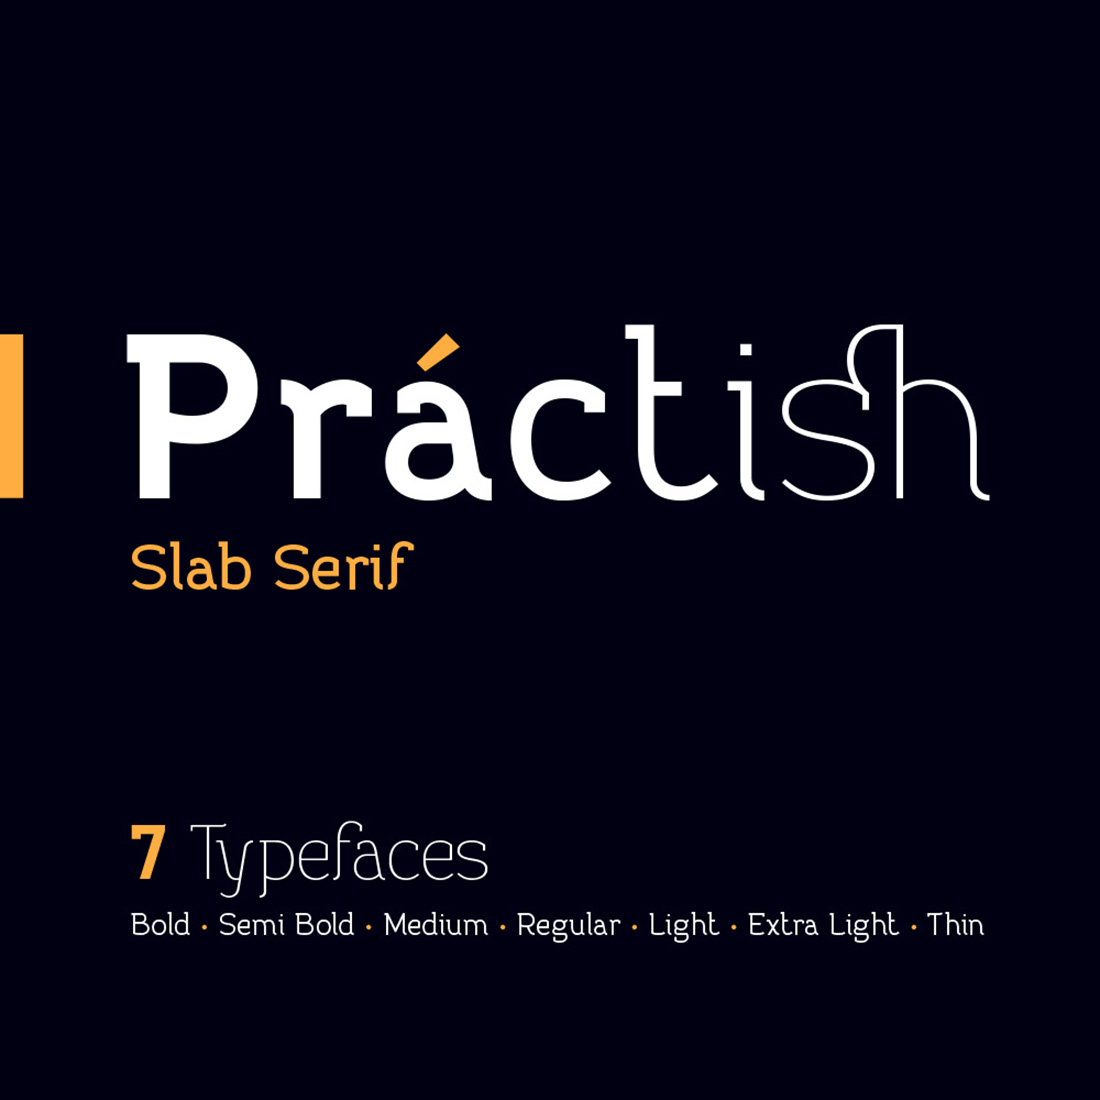 Practish Font Family cover image.